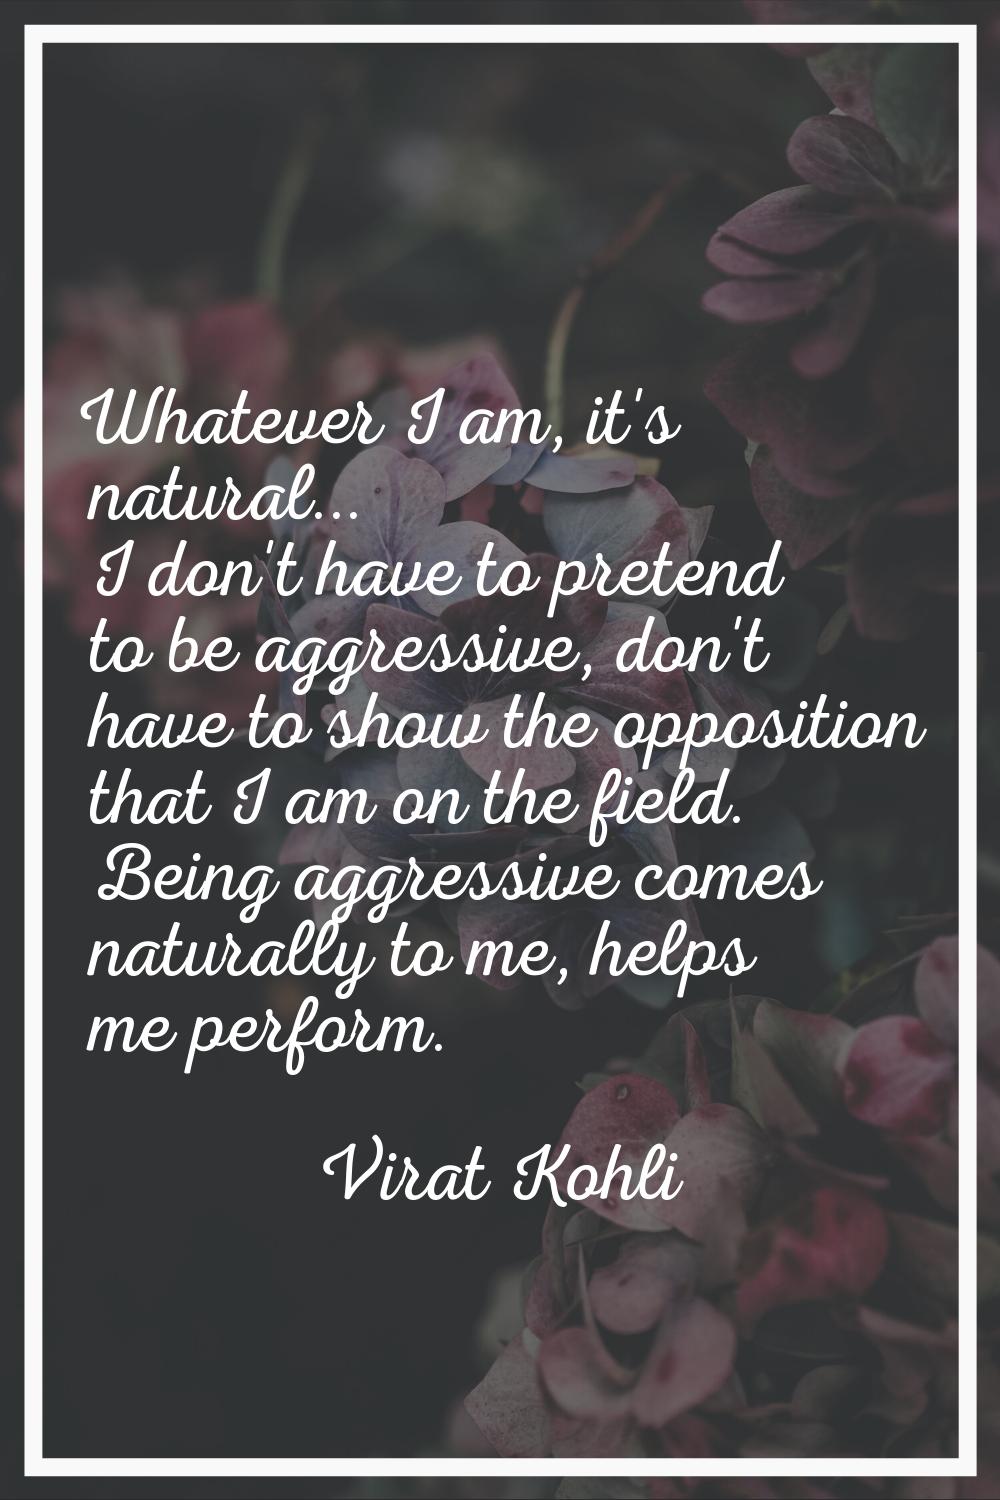 Whatever I am, it's natural... I don't have to pretend to be aggressive, don't have to show the opp